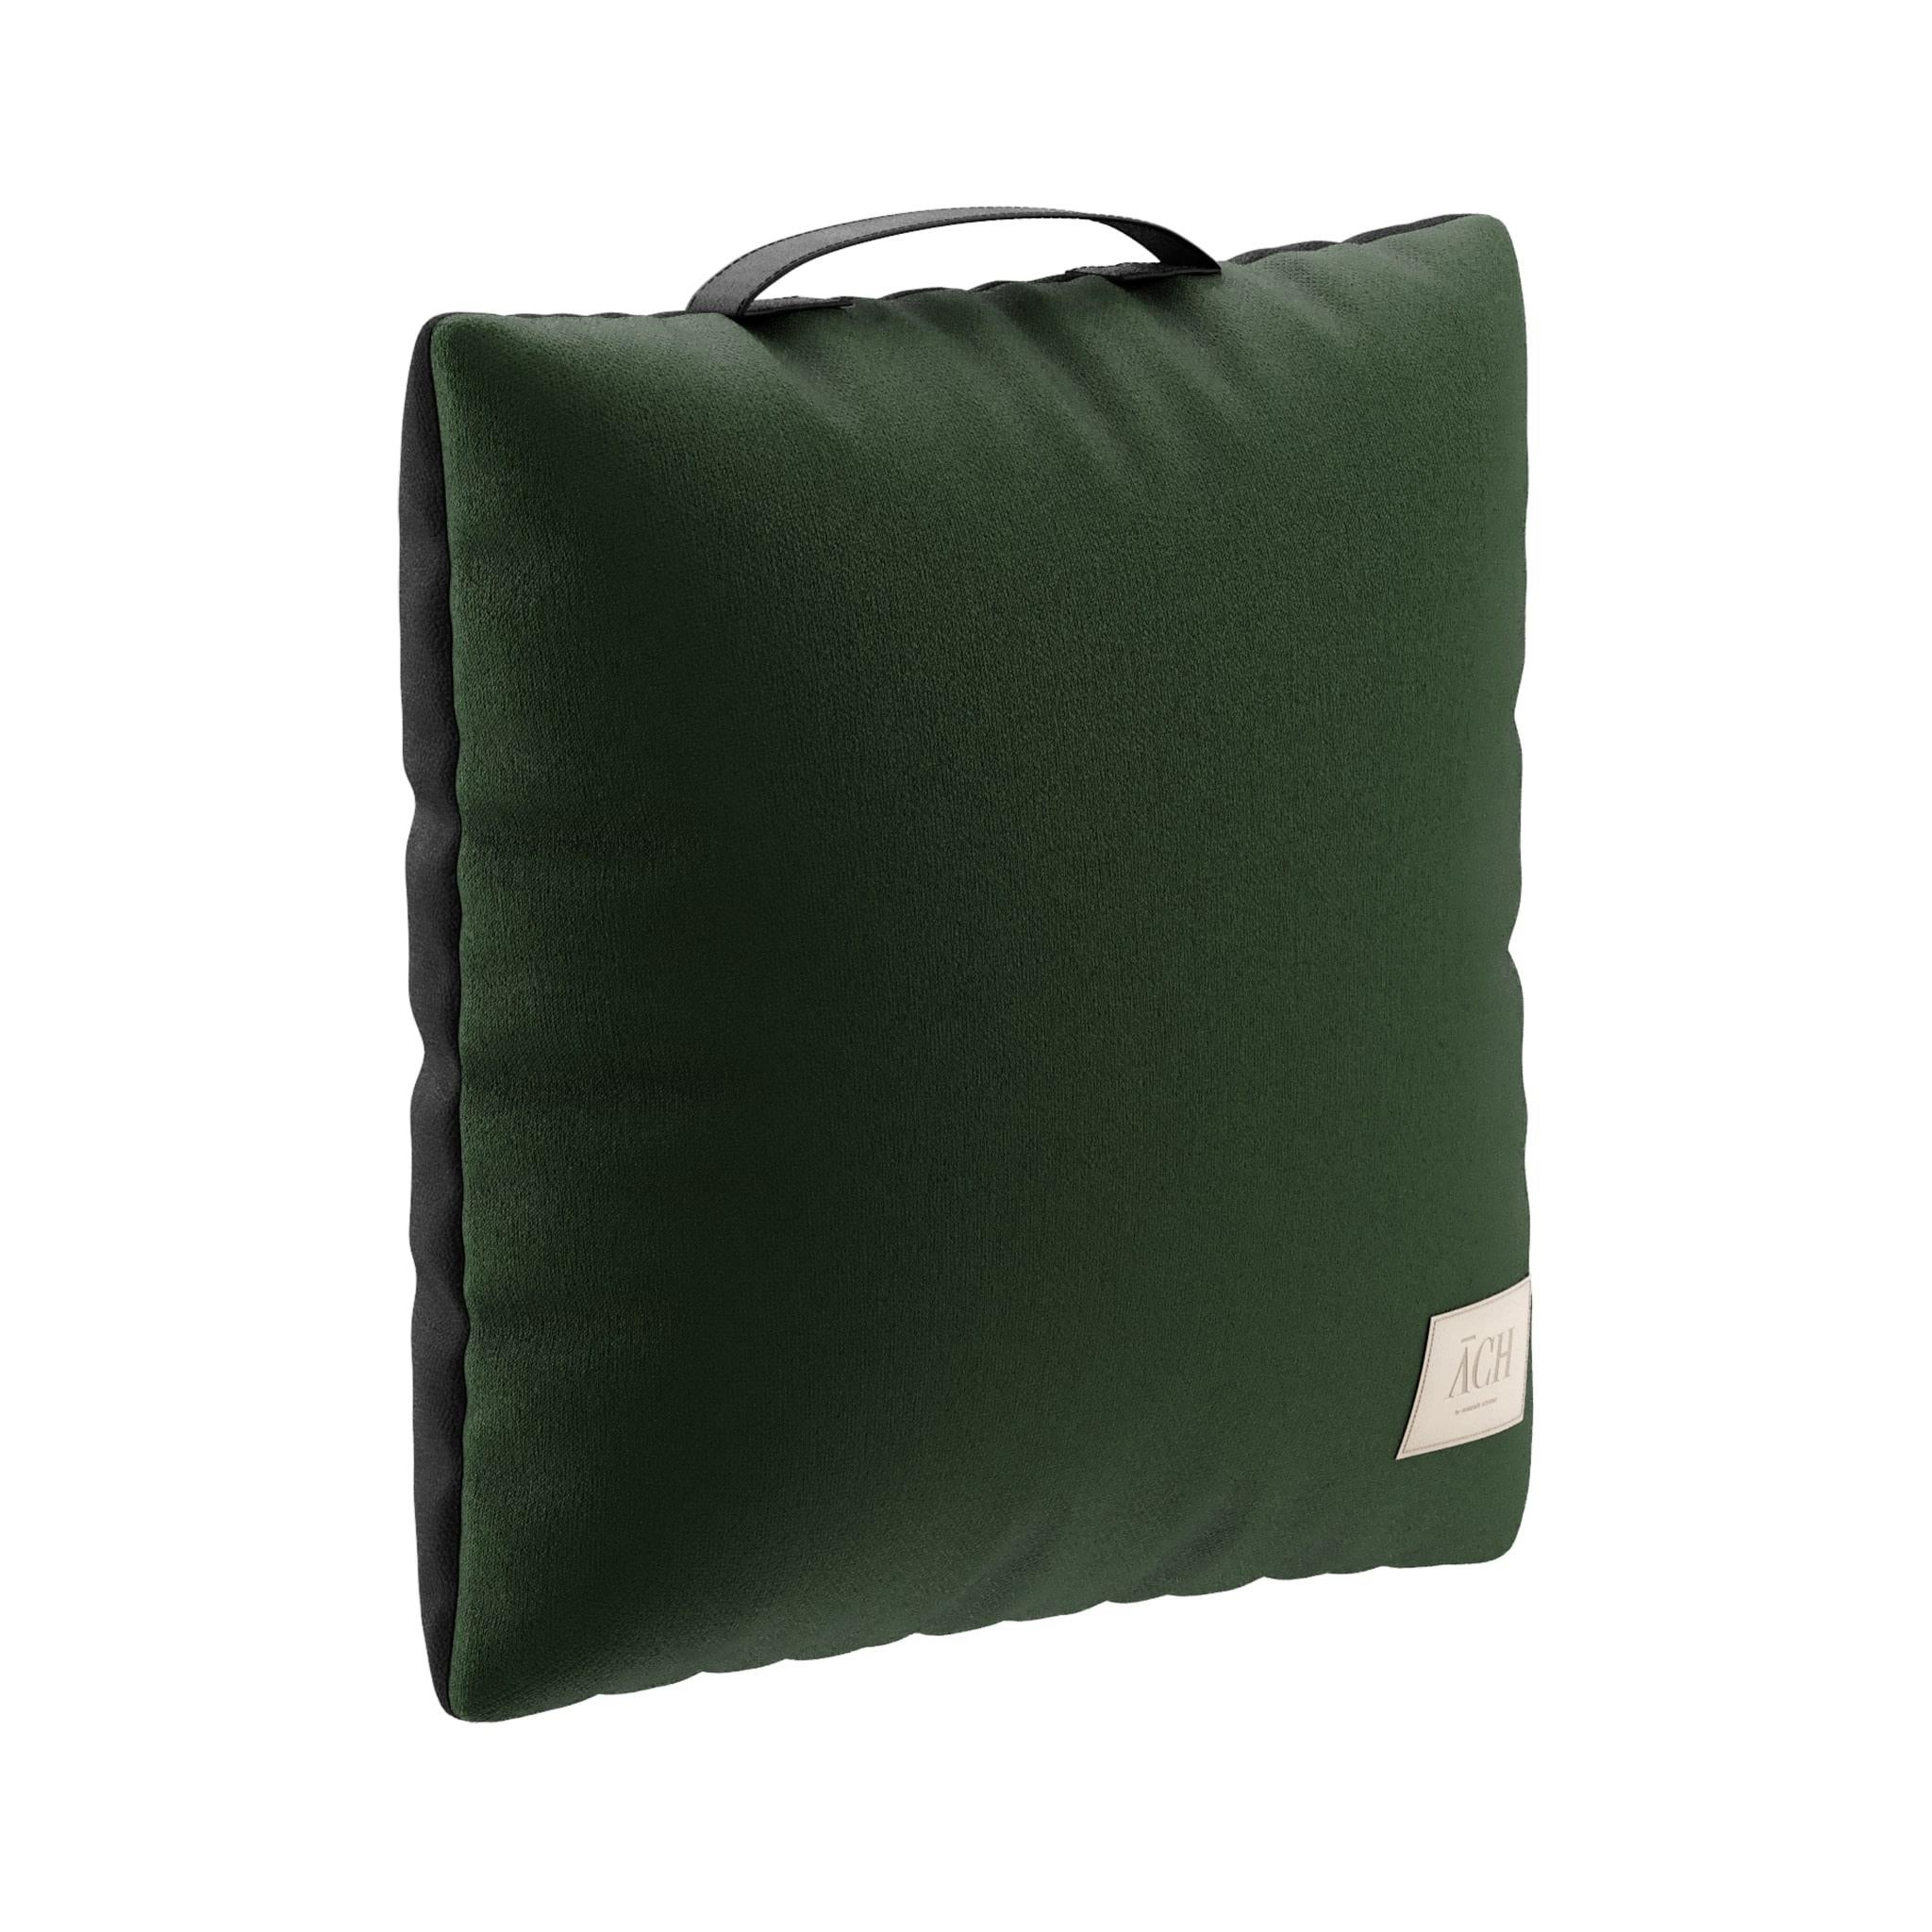 Portuguese Green Outdoor Throw Pillow, Modern Waterproof Square Cushion Decor Handle